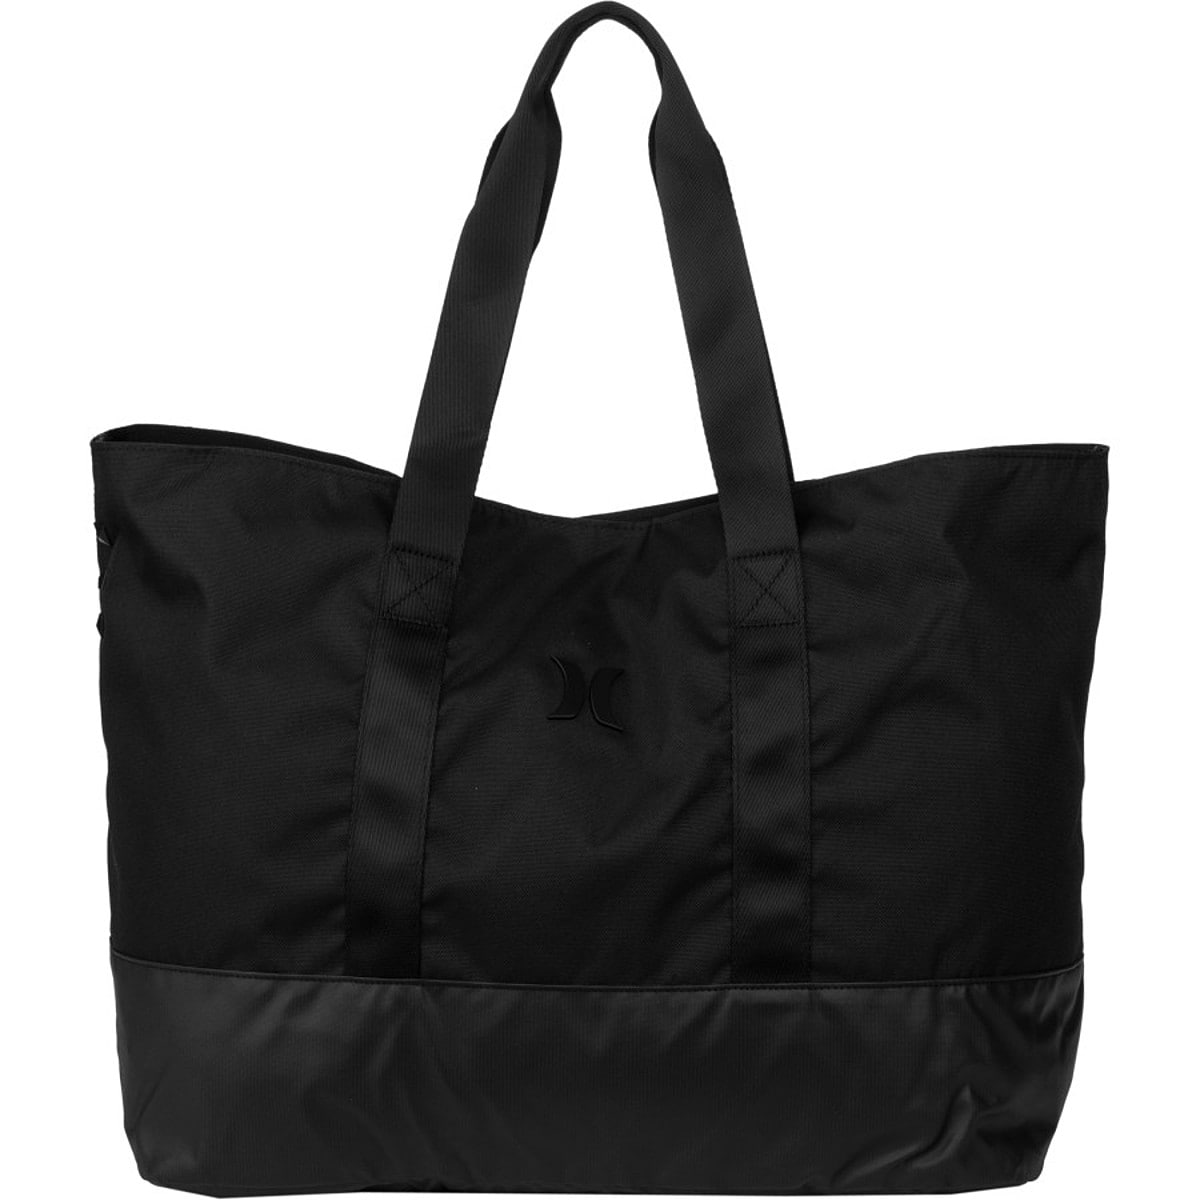 Hurley Beach Tote Bag - Accessories